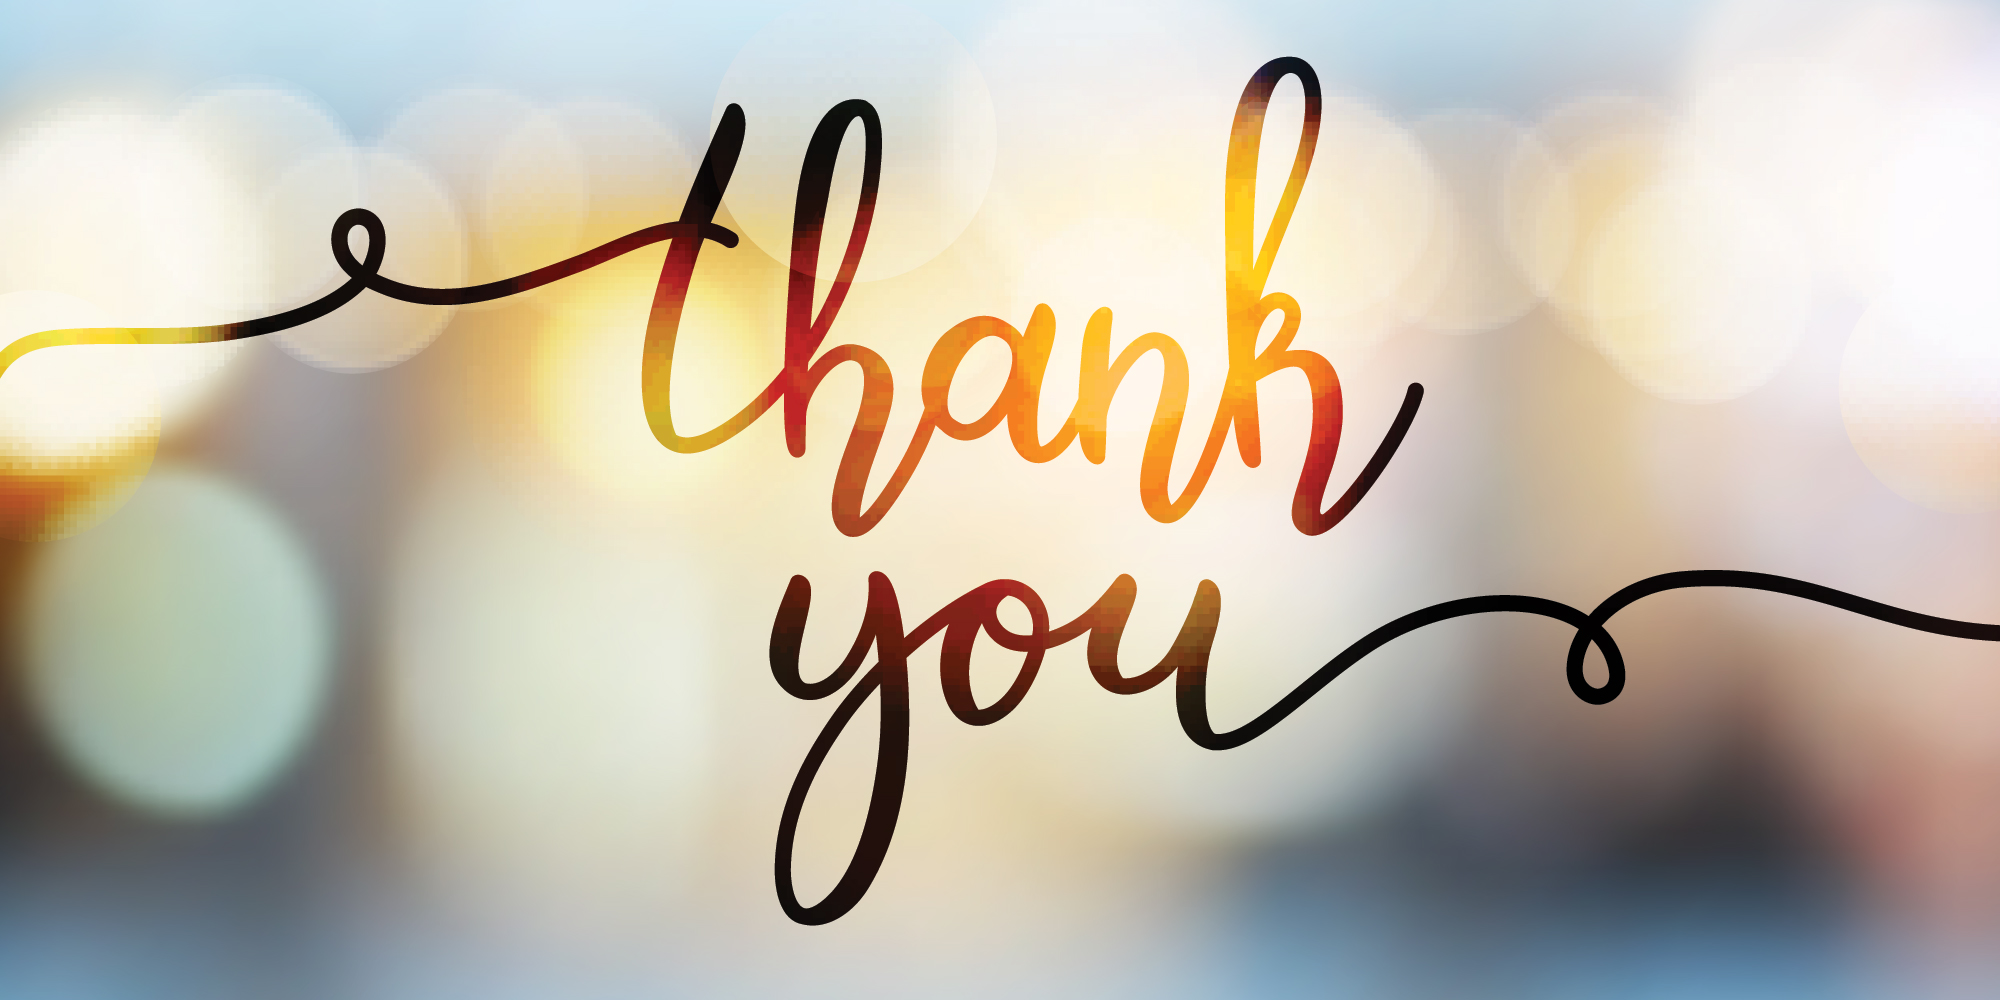 Stock image that says "Thank you"